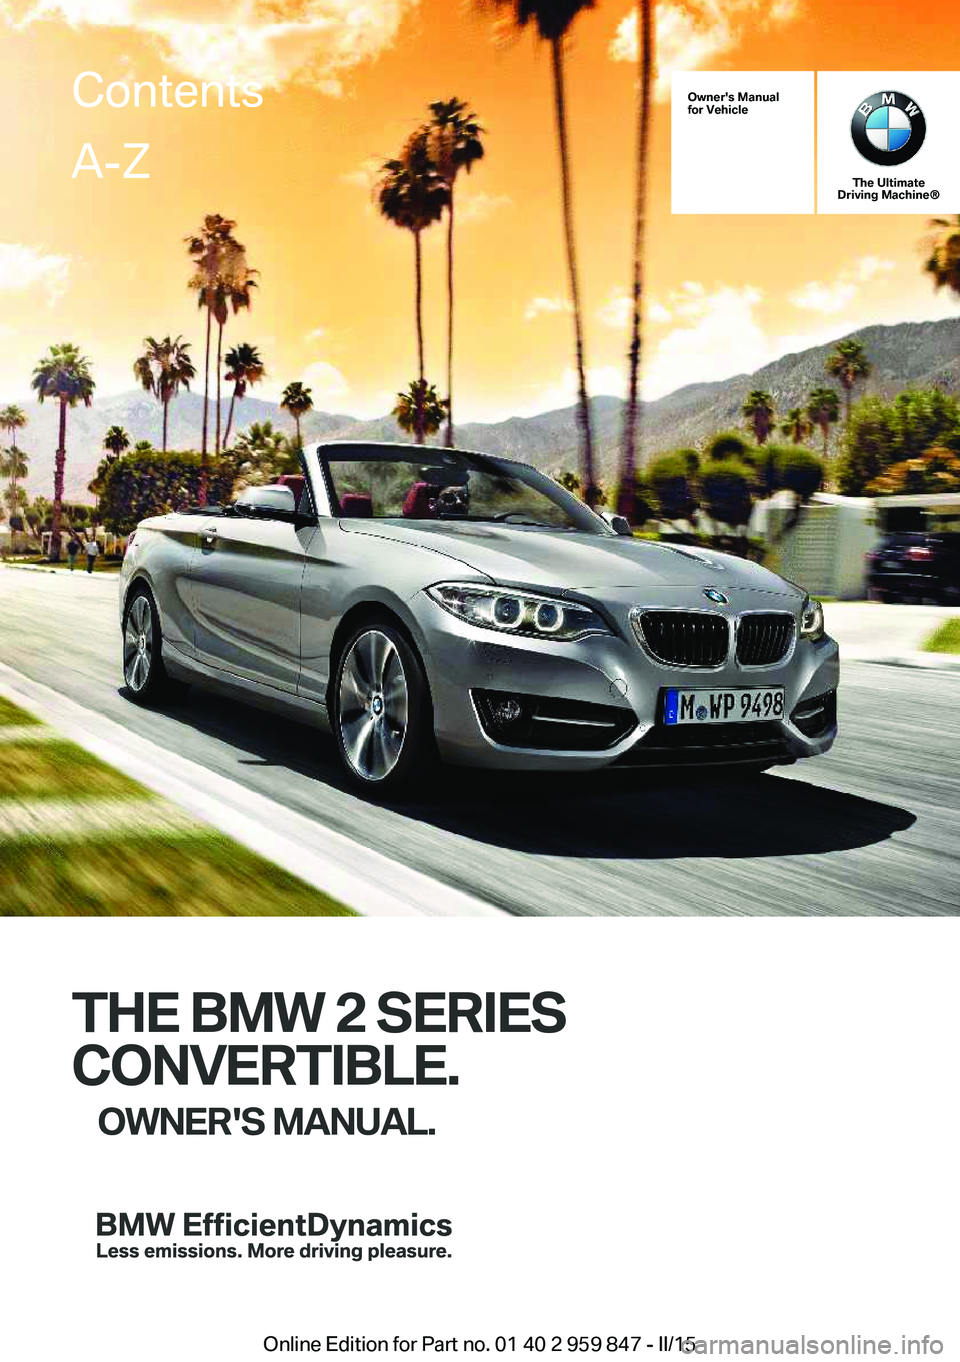 BMW M235I CONVERTIBLE 2016  Owners Manual Owner's Manual
for Vehicle
The Ultimate
Driving Machine®
THE BMW 2 SERIES
CONVERTIBLE. OWNER'S MANUAL.
ContentsA-Z
Online Edition for Part no. 01 40 2 959 847 - II/15   